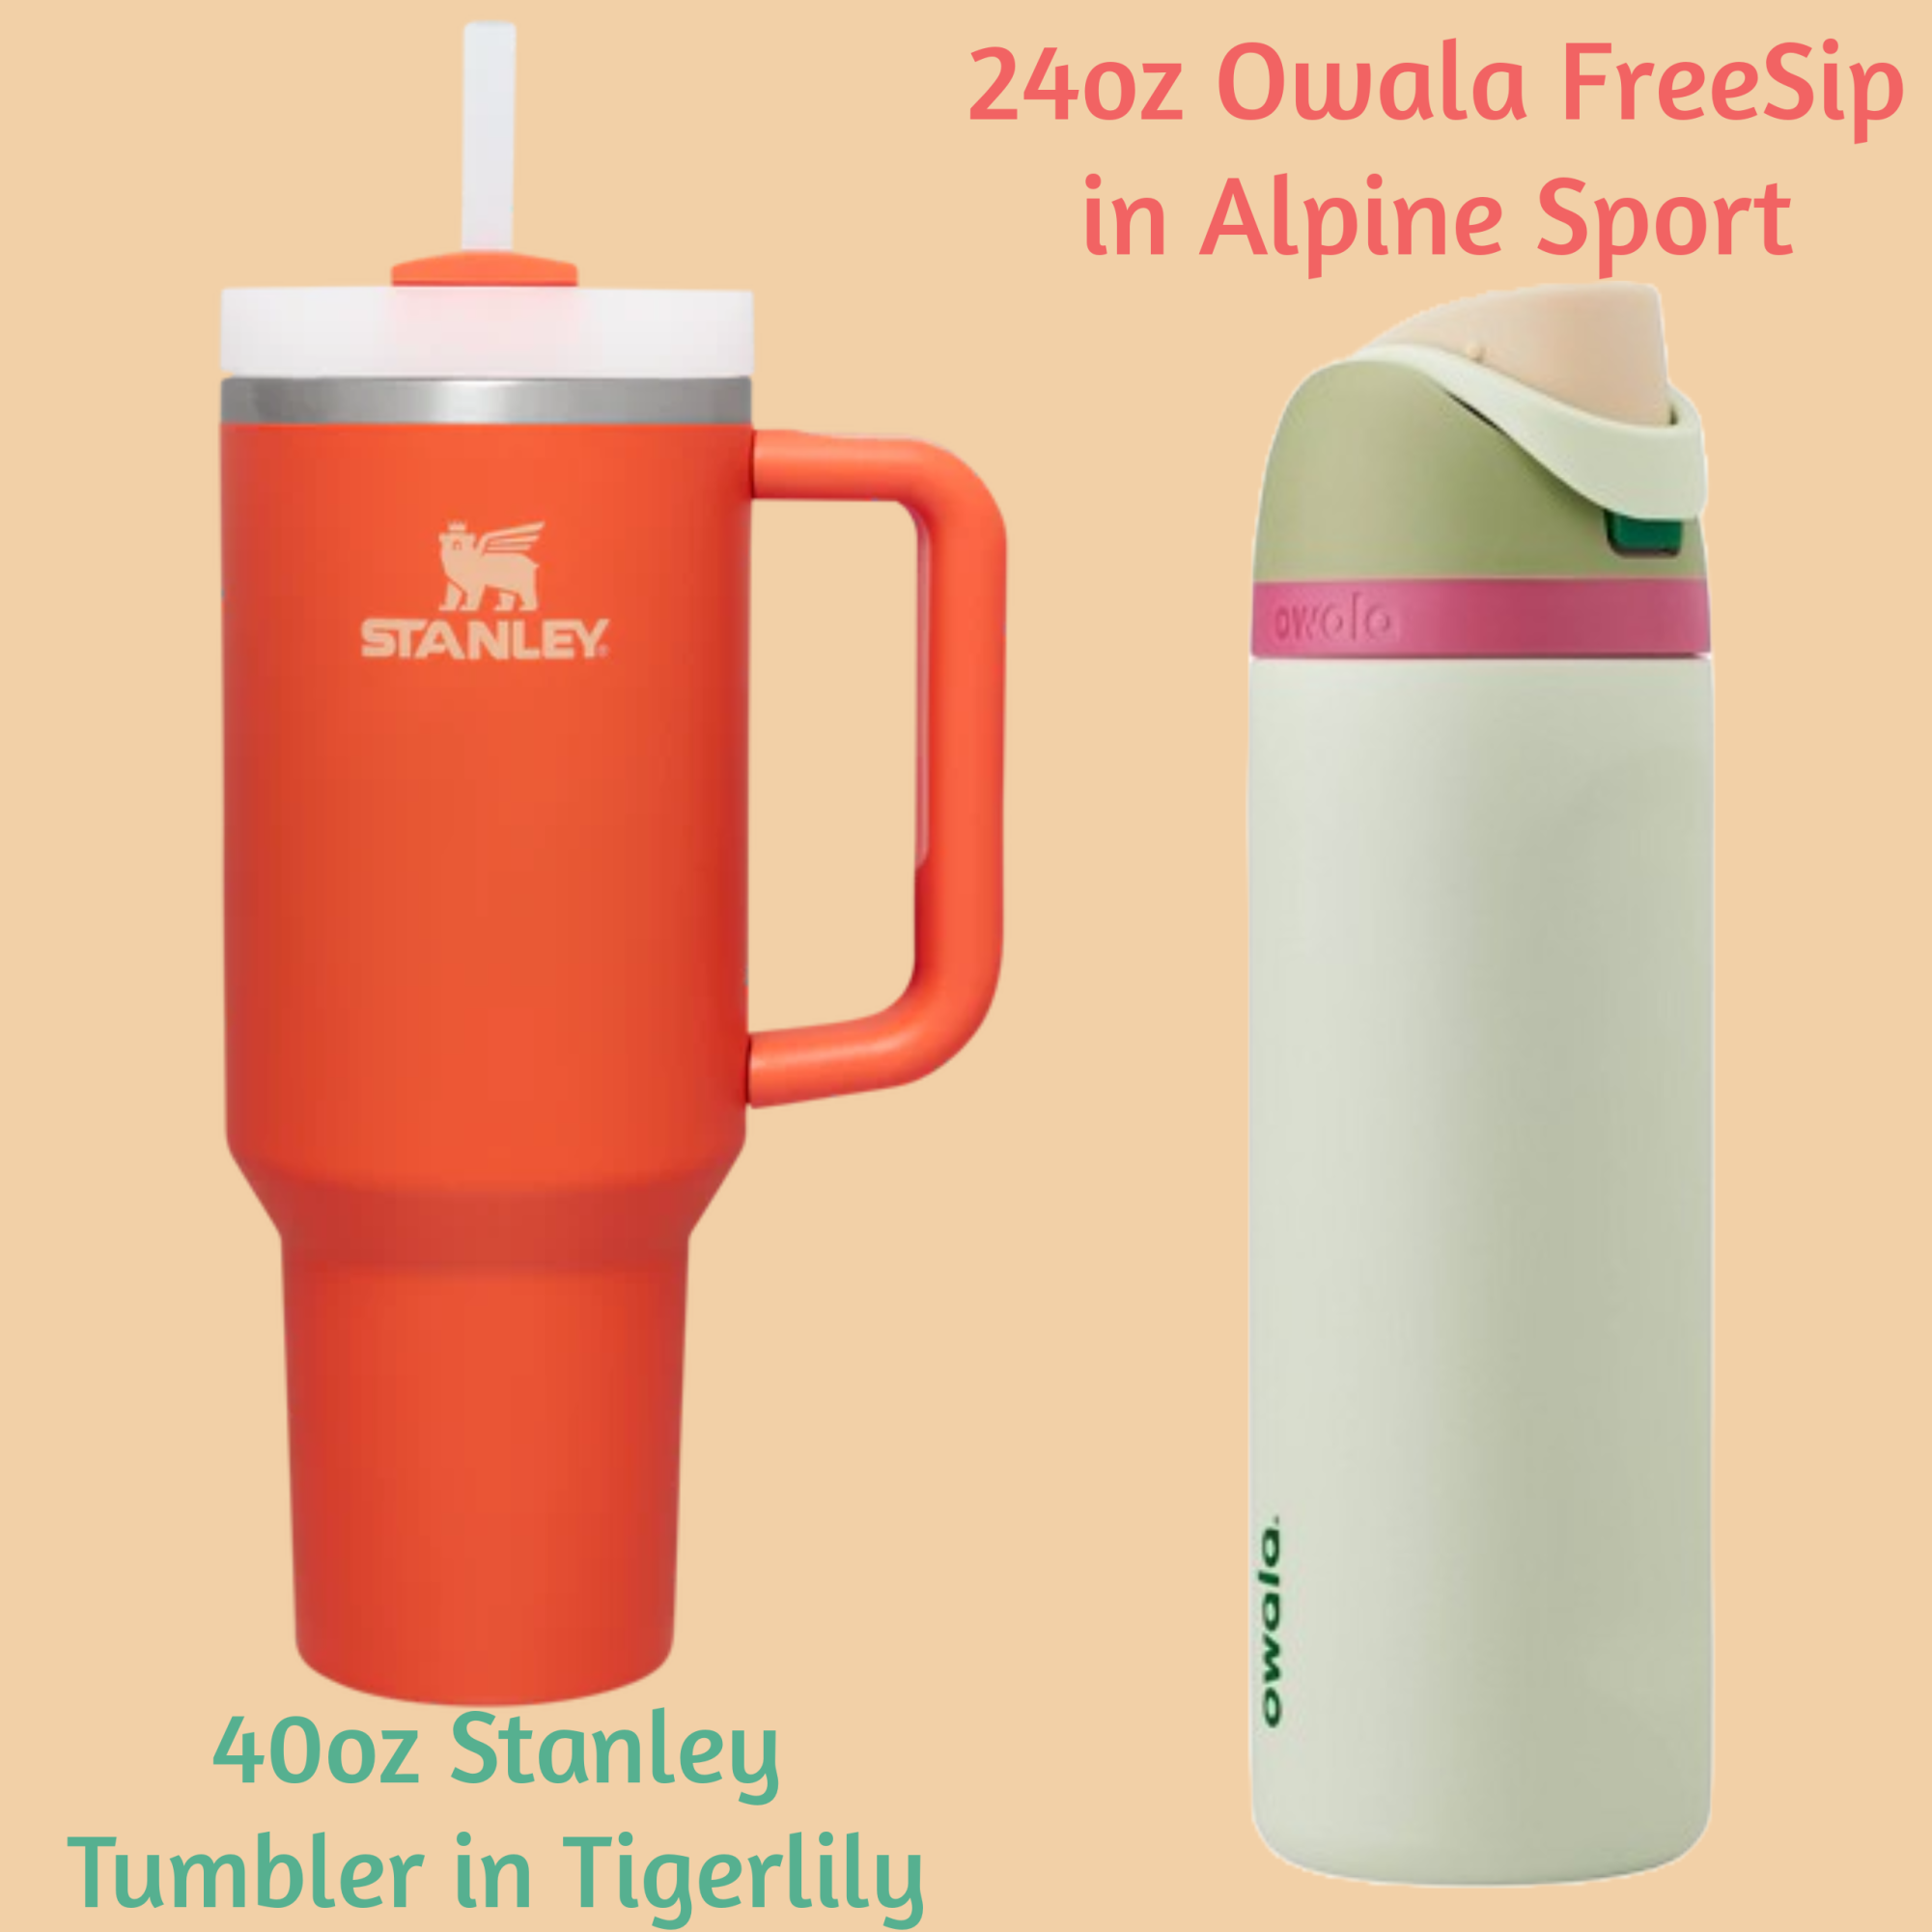 Stanley and Owala Water Bottles: Whats the Difference?